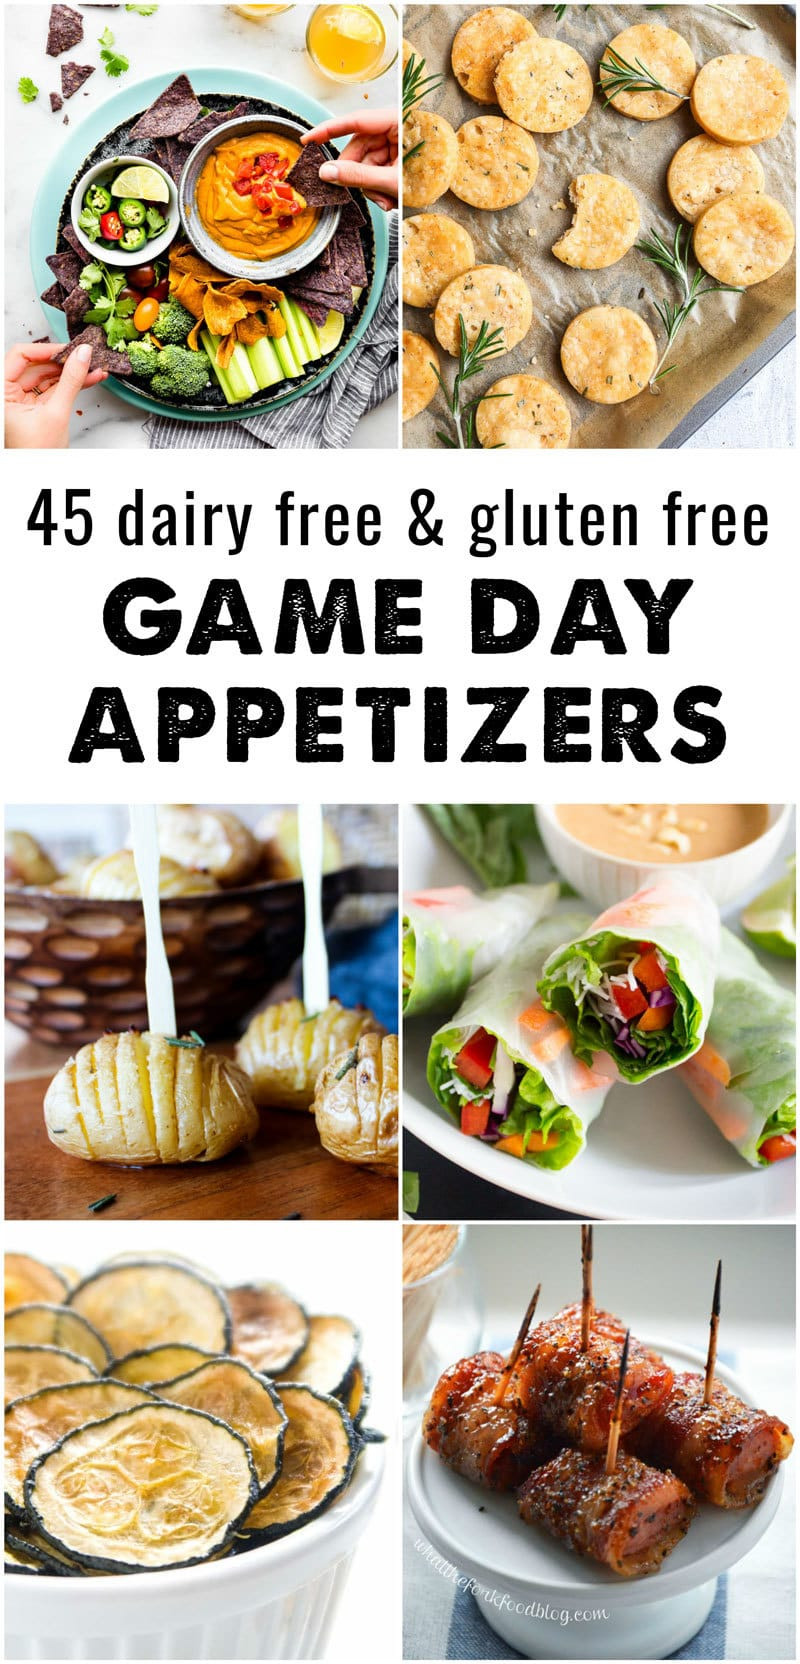 Gluten Dairy Free Appetizers
 45 Dairy Free and Gluten Free Appetizers • The Fit Cookie